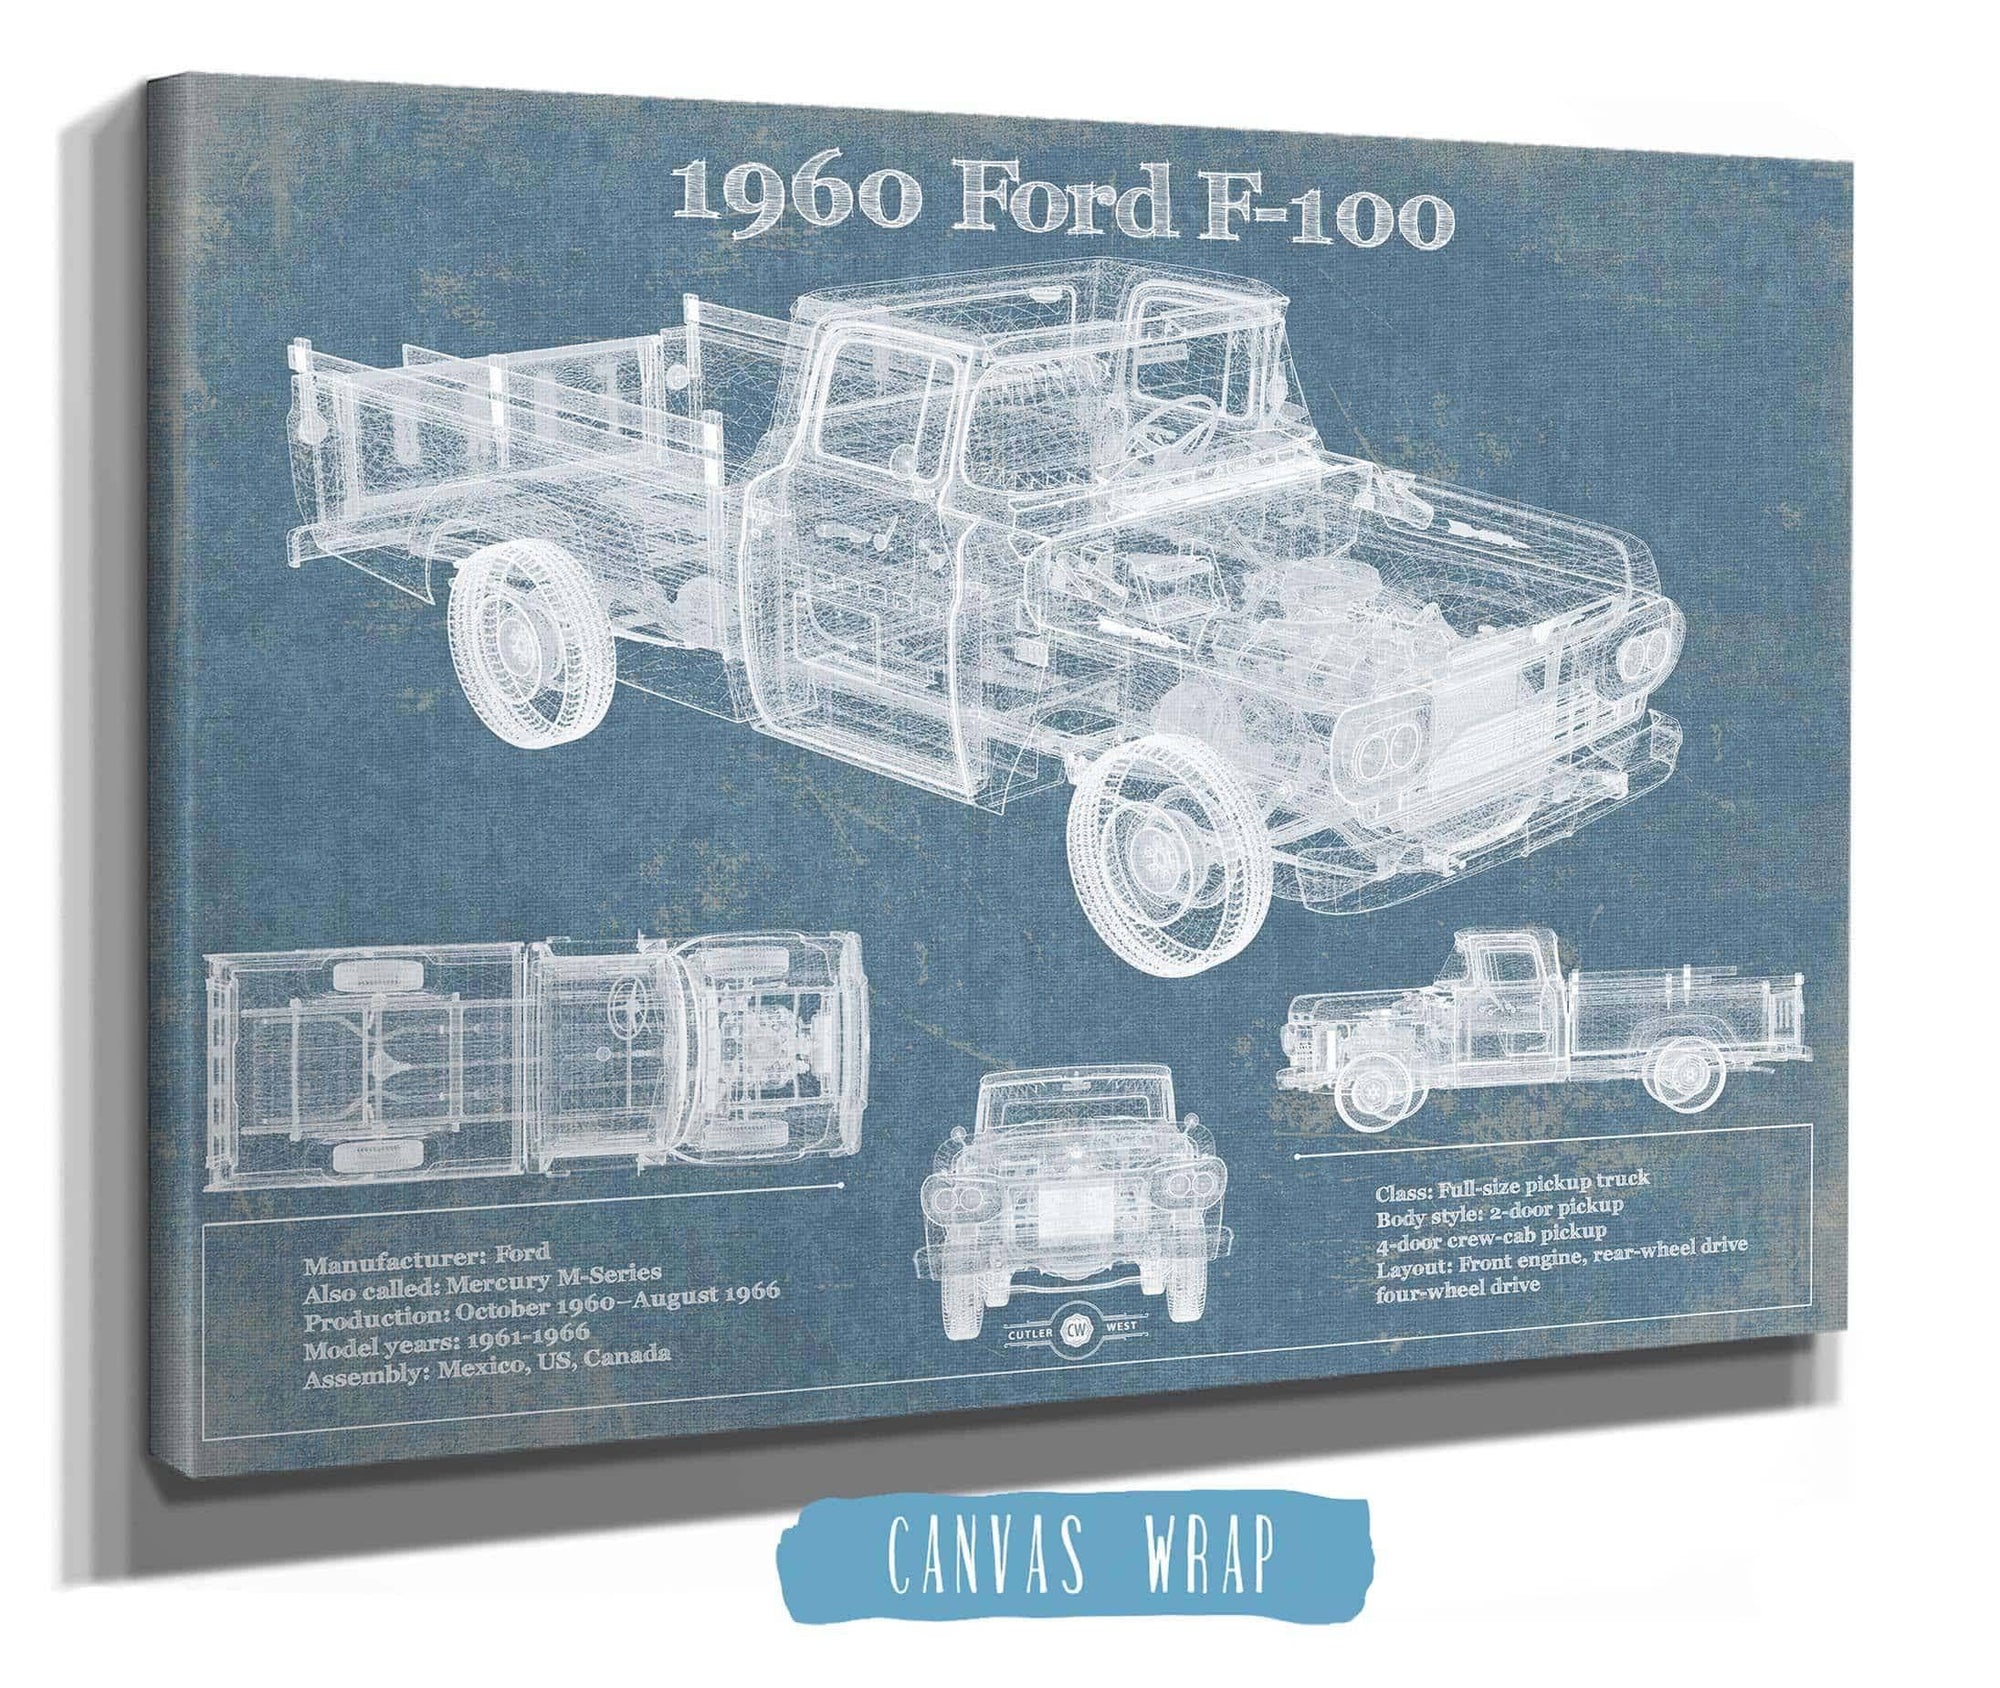 Cutler West Ford Collection 1960 Ford F-100 Blueprint Vintage Auto Print